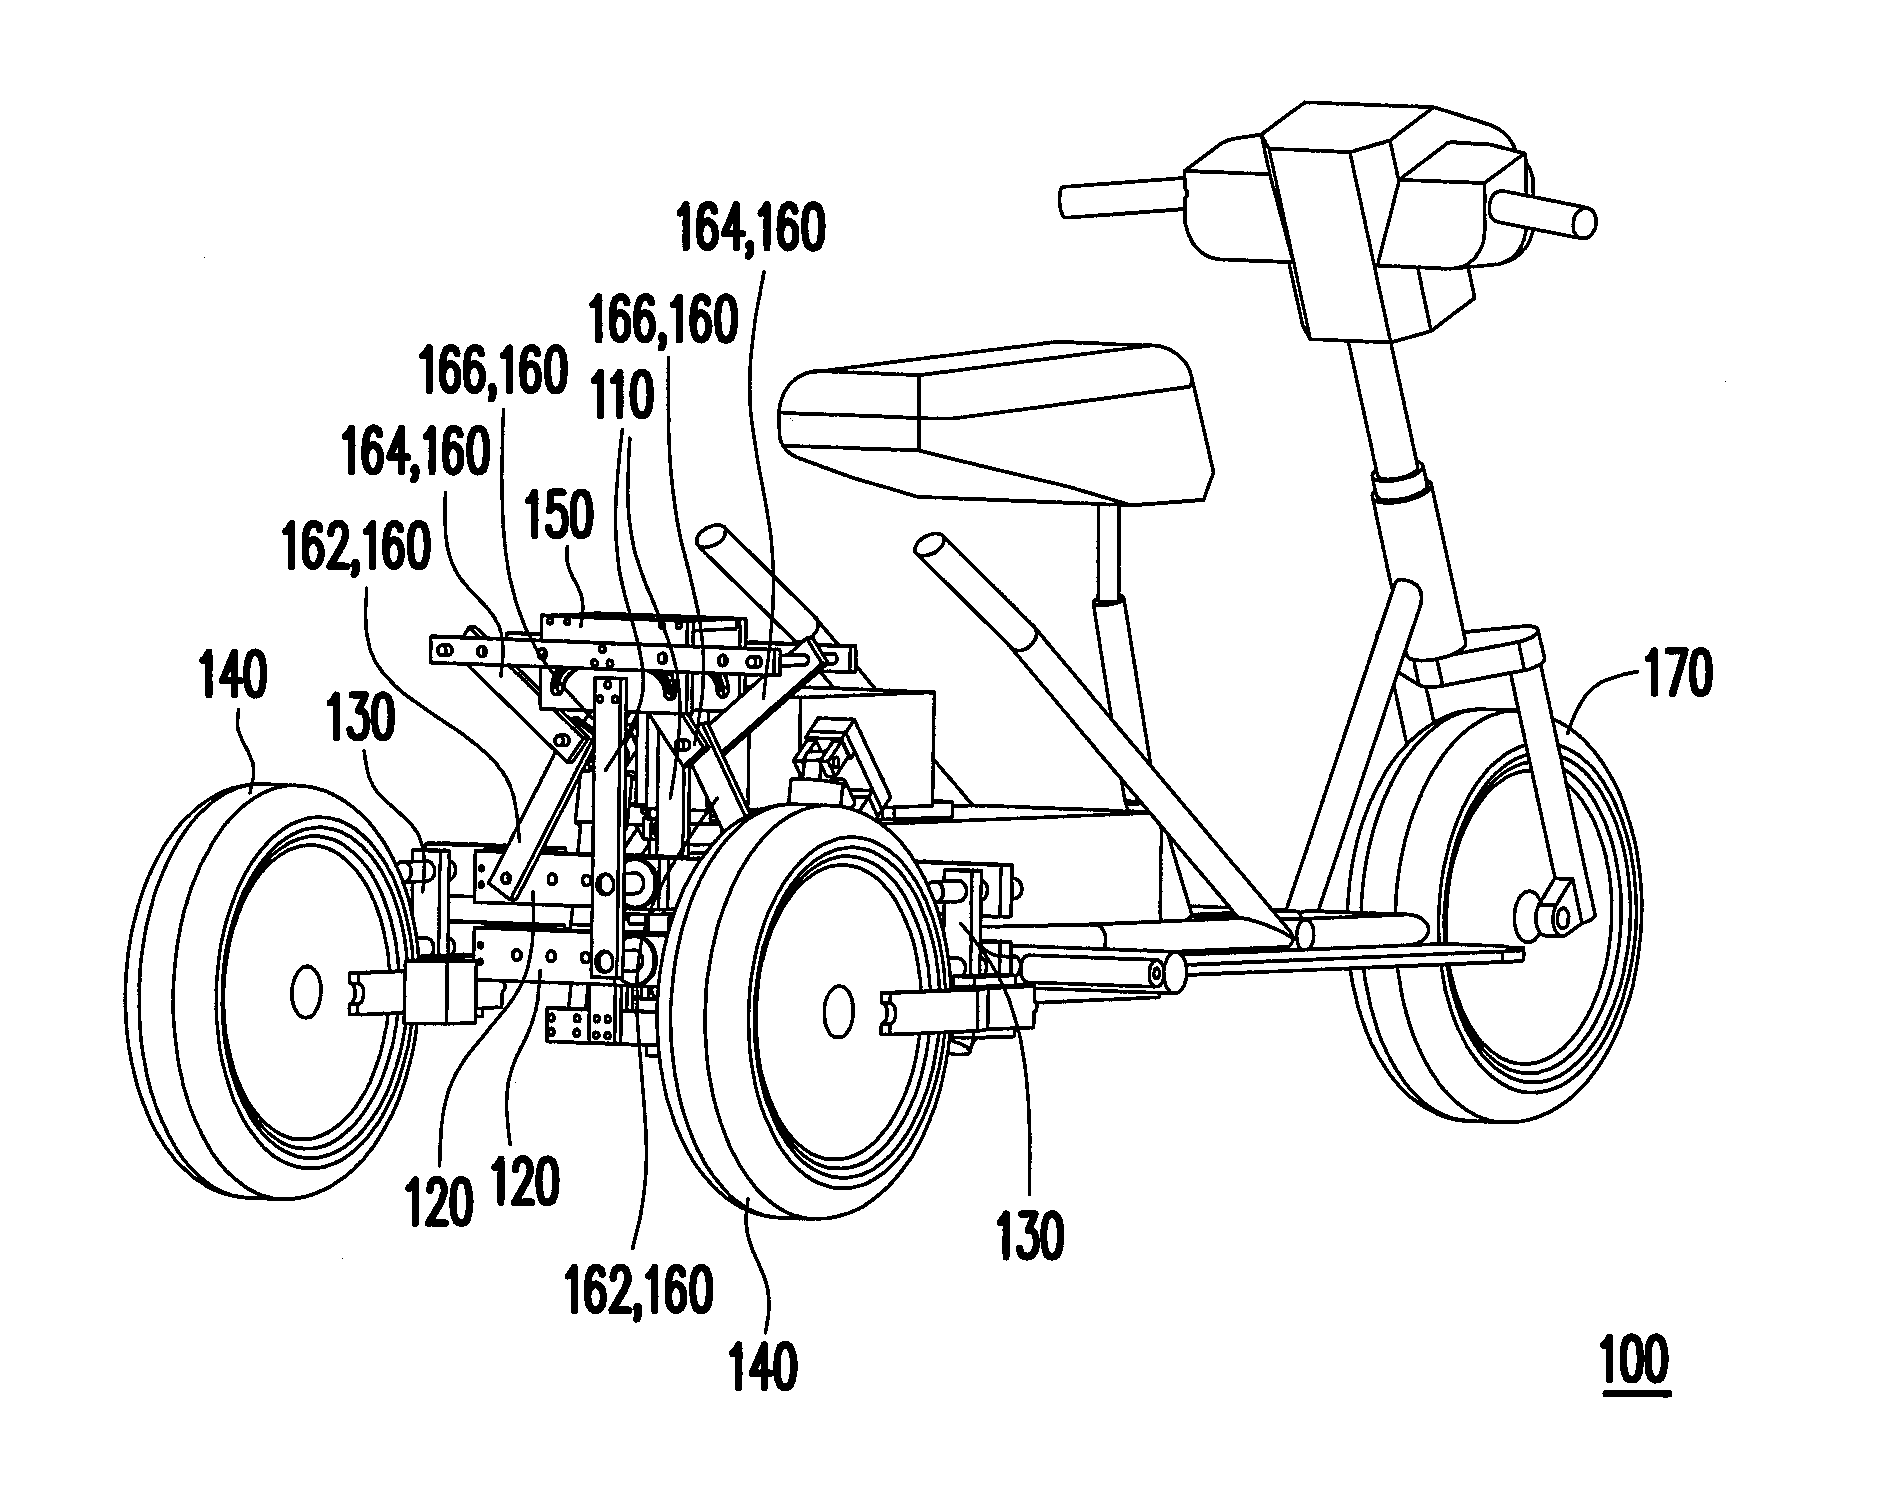 Three-wheeled motor vehicle with high safety